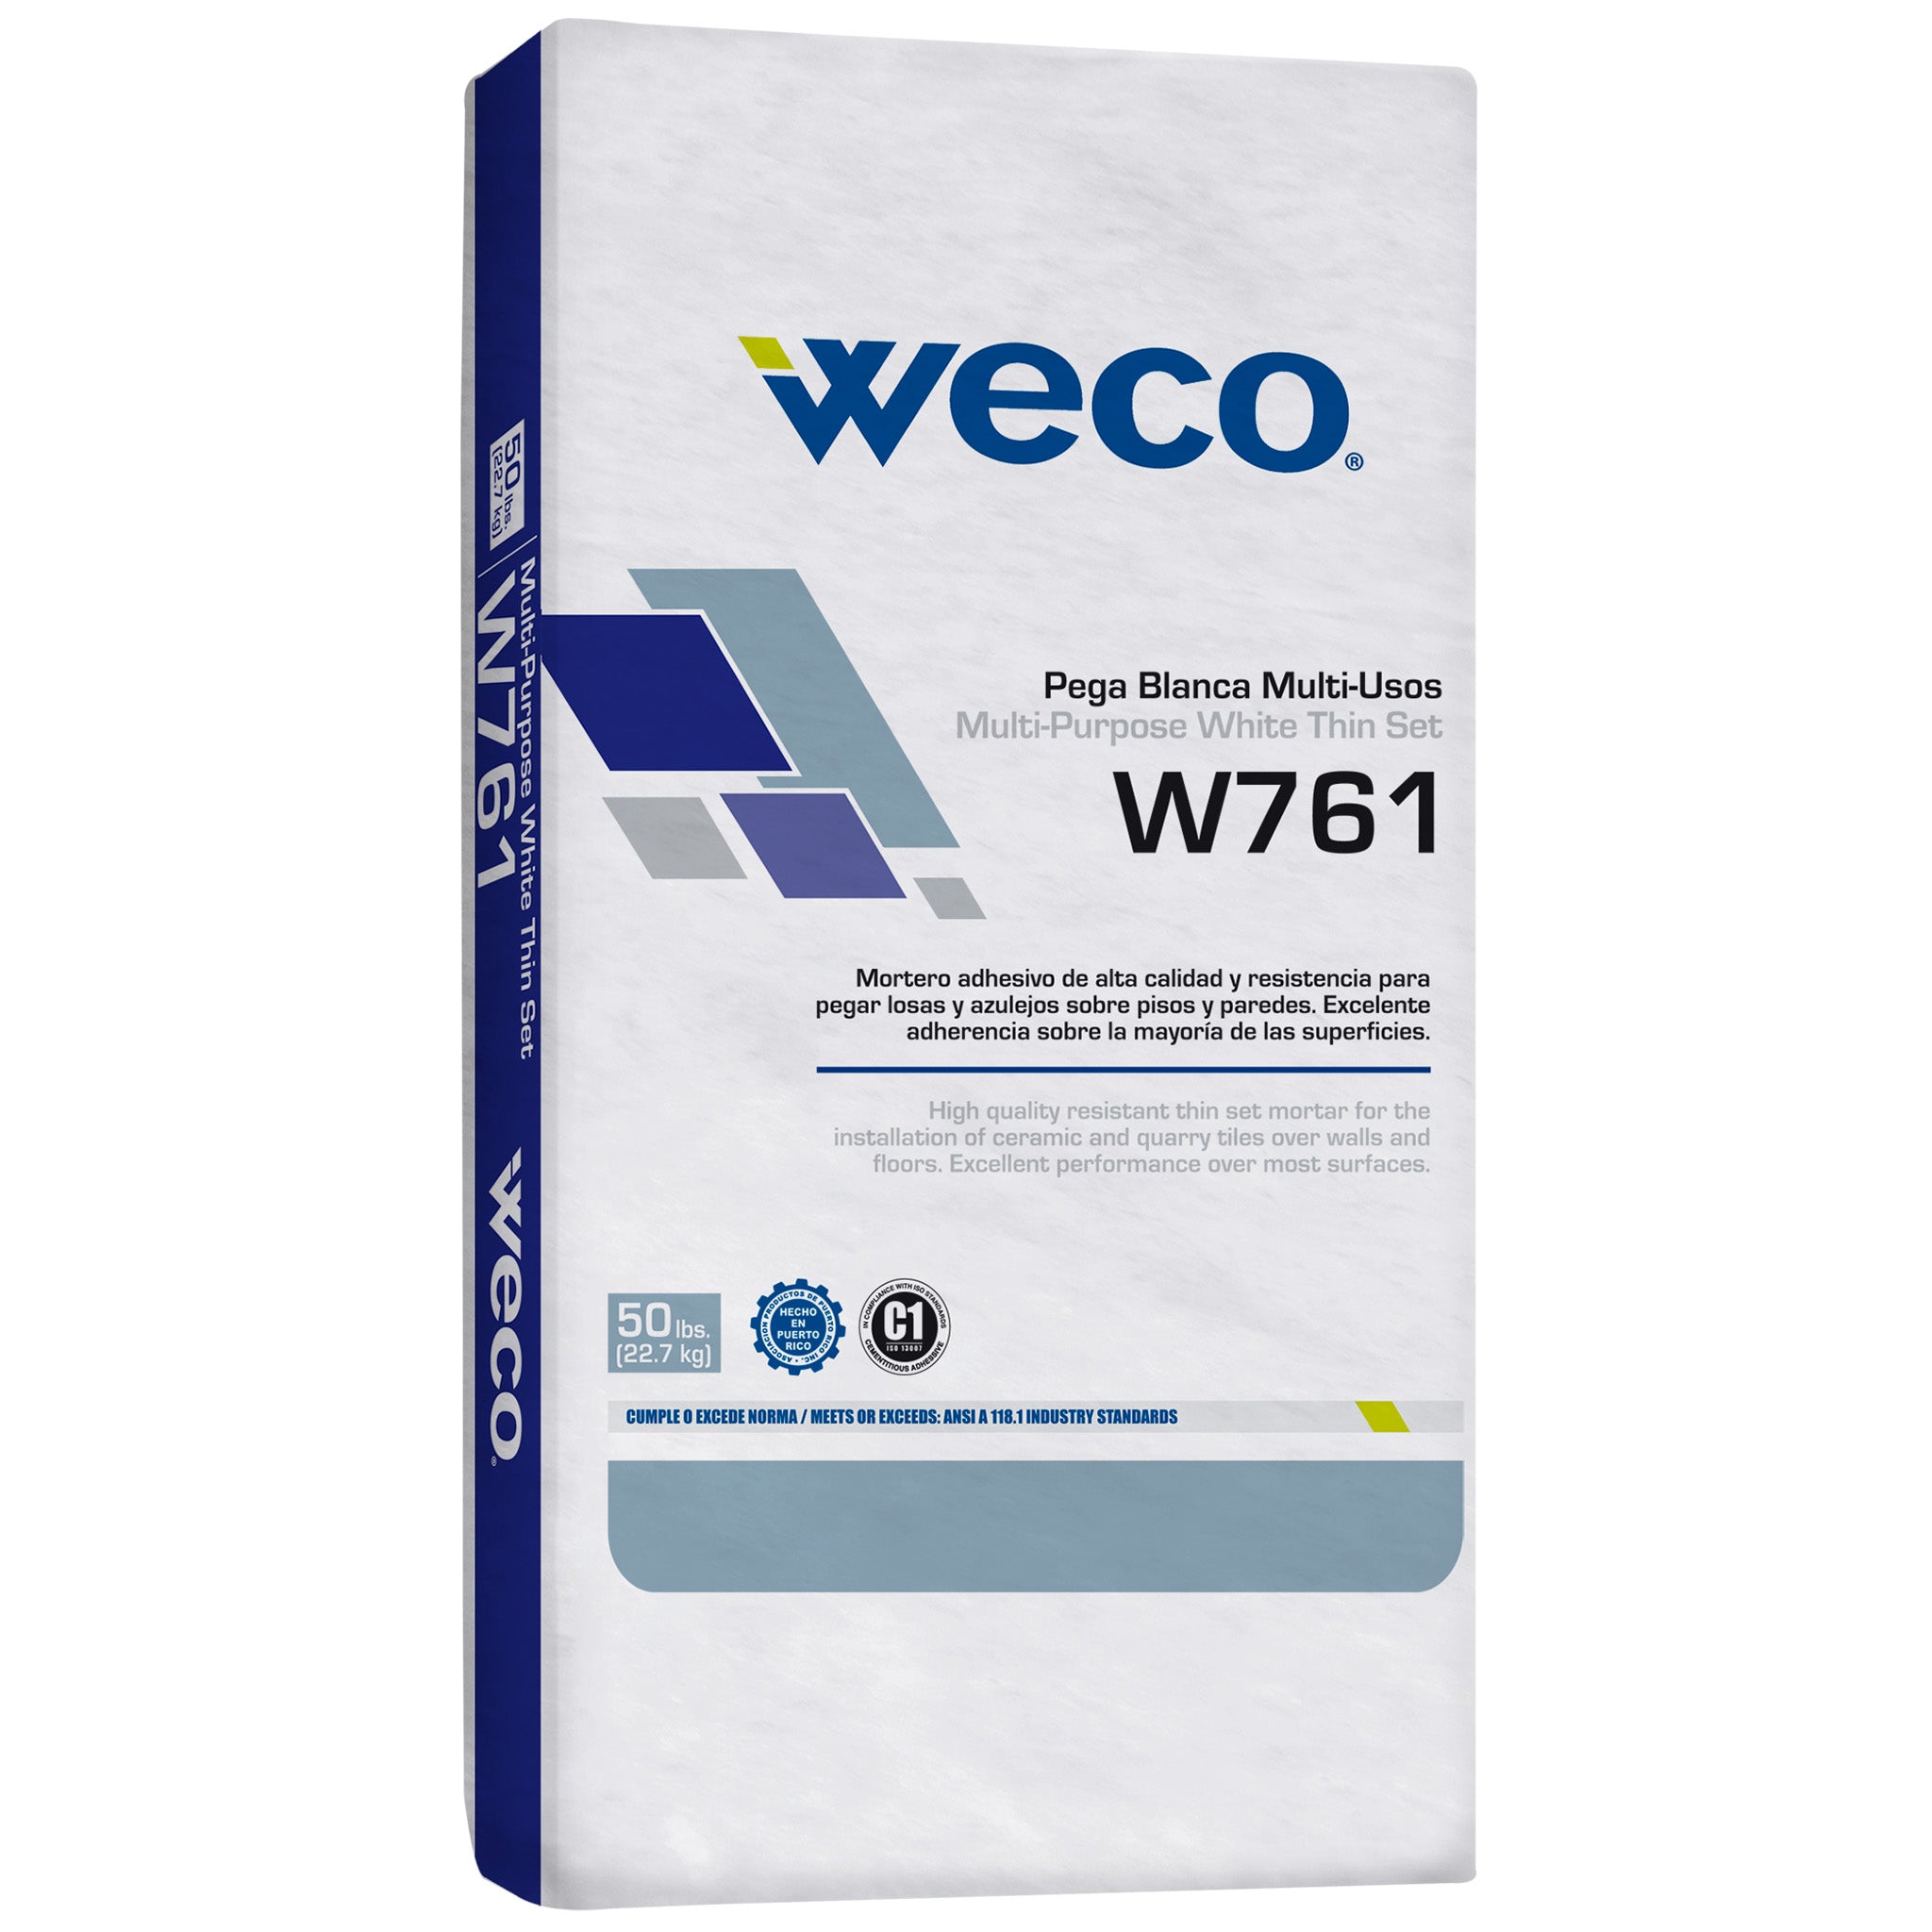 W-761 Wall-Floor Thinset White